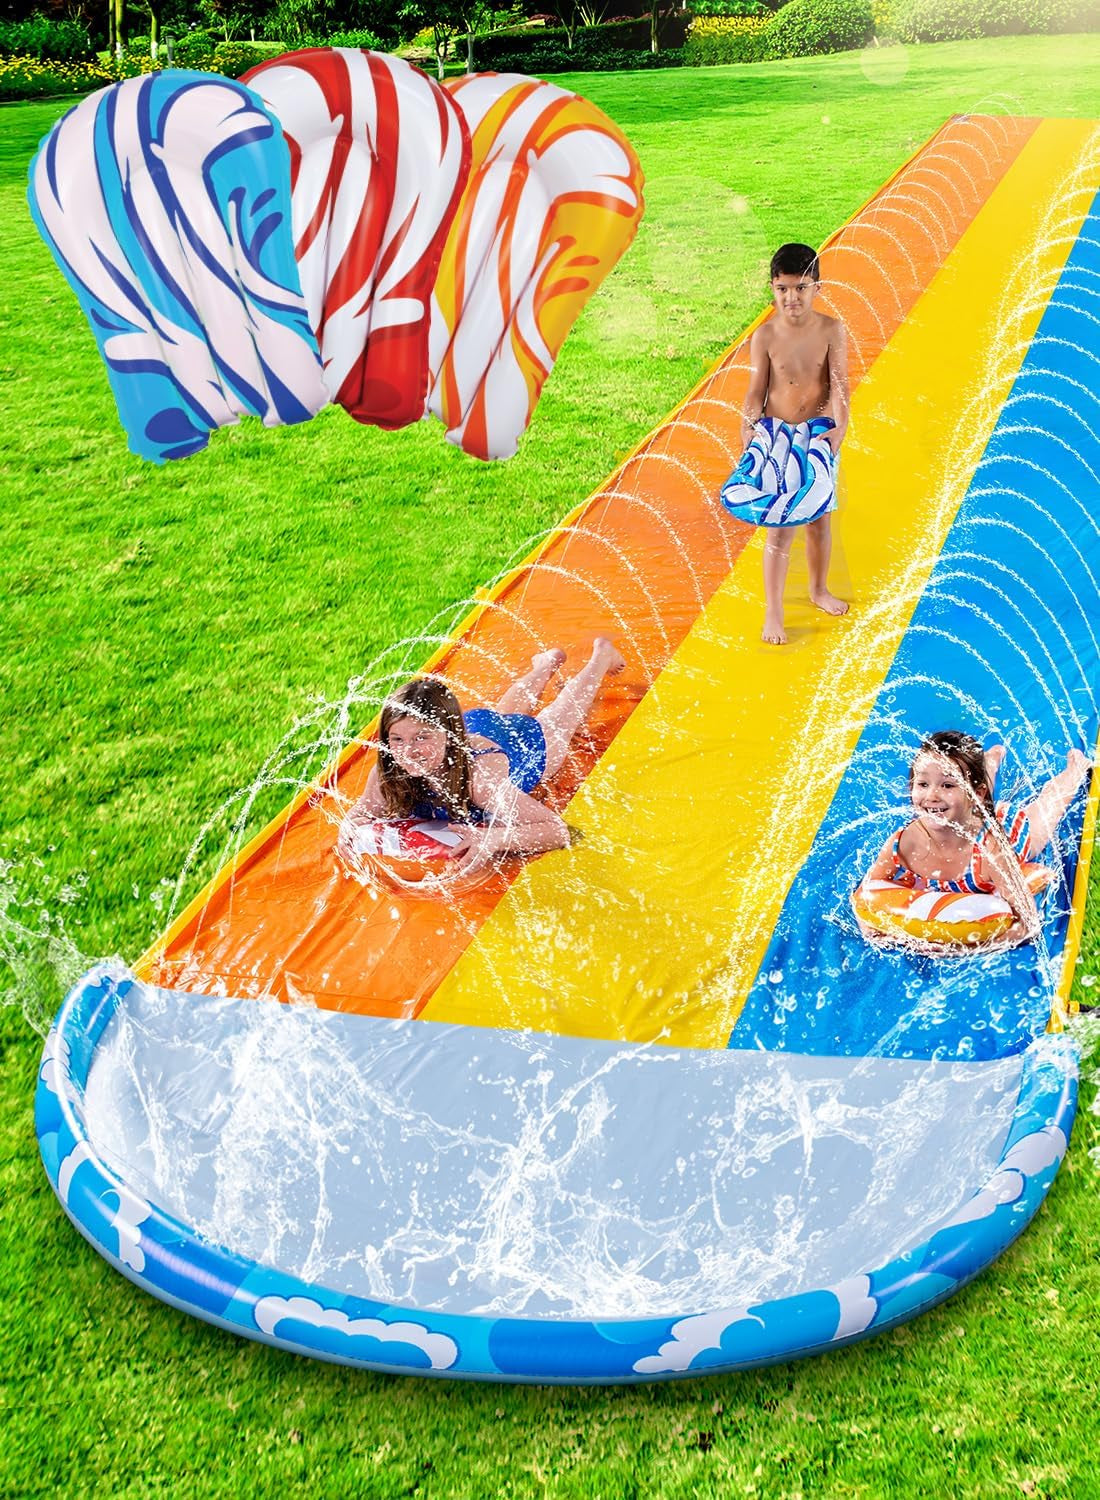 22.5Ft Water Slides and 2 Bodyboards, Lawn Water Slide Summer Slip Waterslides Water Toy with Build in Sprinkler for Backyard Outdoor Water Fun for Kids